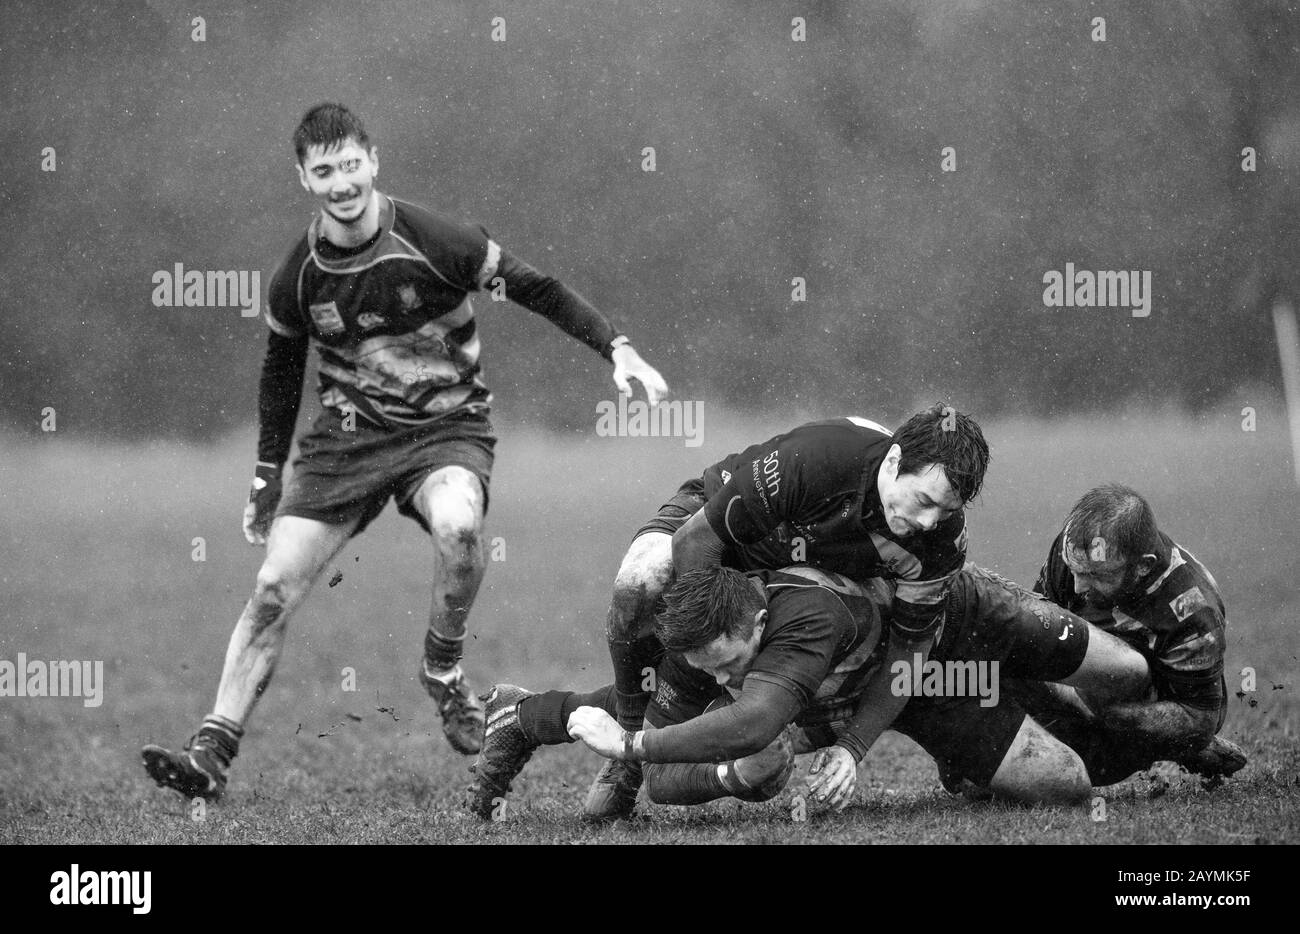 Amateur Rugby Union players carry on playing in driving rain and strong winds. Stock Photo